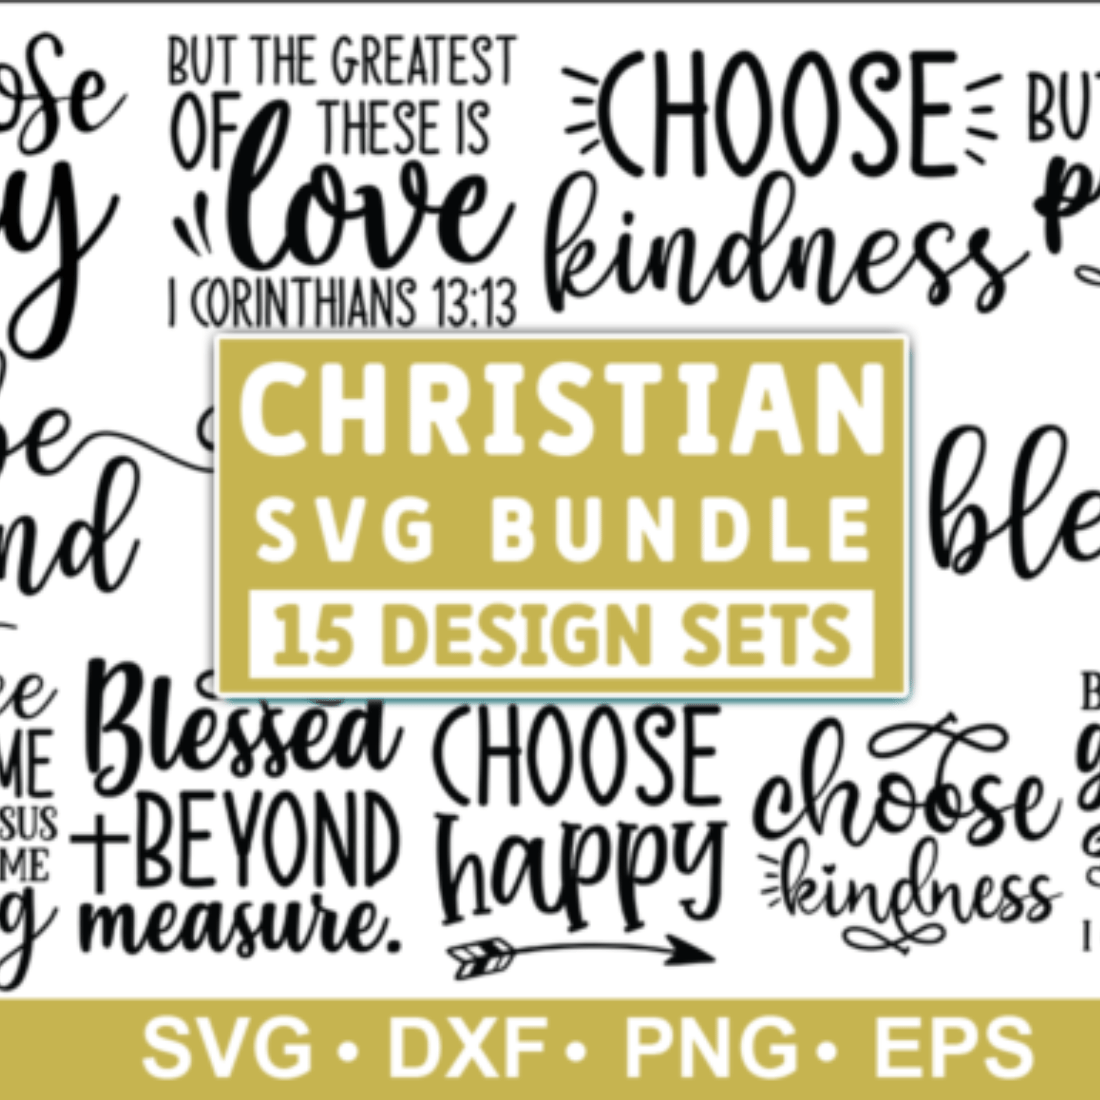 Christian SVG Bundle, Christian Quotes cover image.